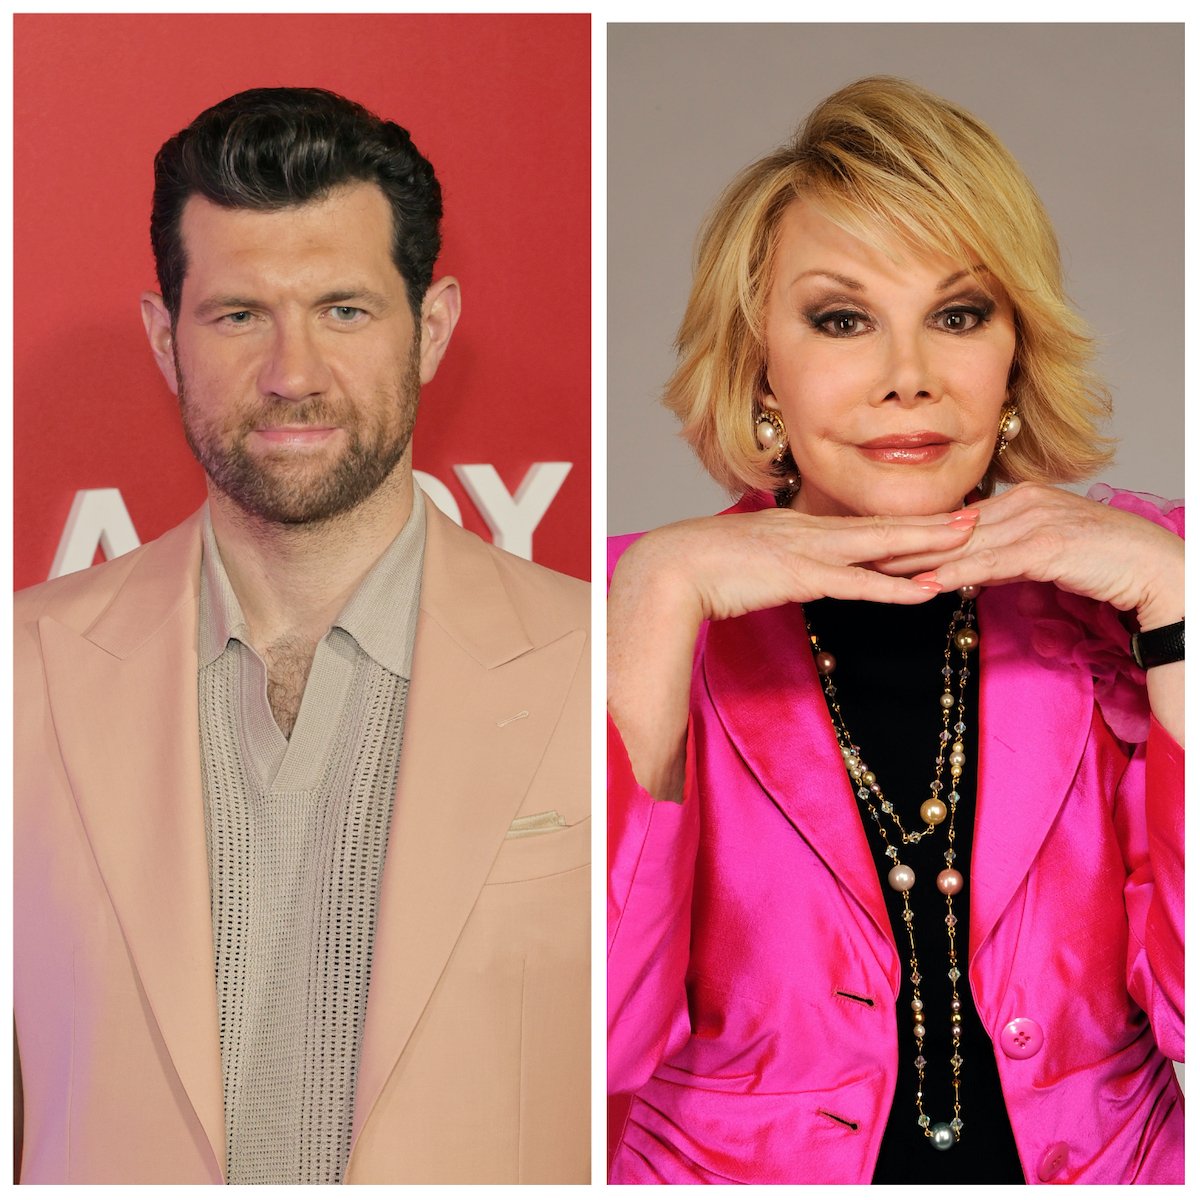 Bro’s Billy Eichner Recalls How Joan Rivers Helped Make Him a Star –’She Really Became a Mentor to Me’